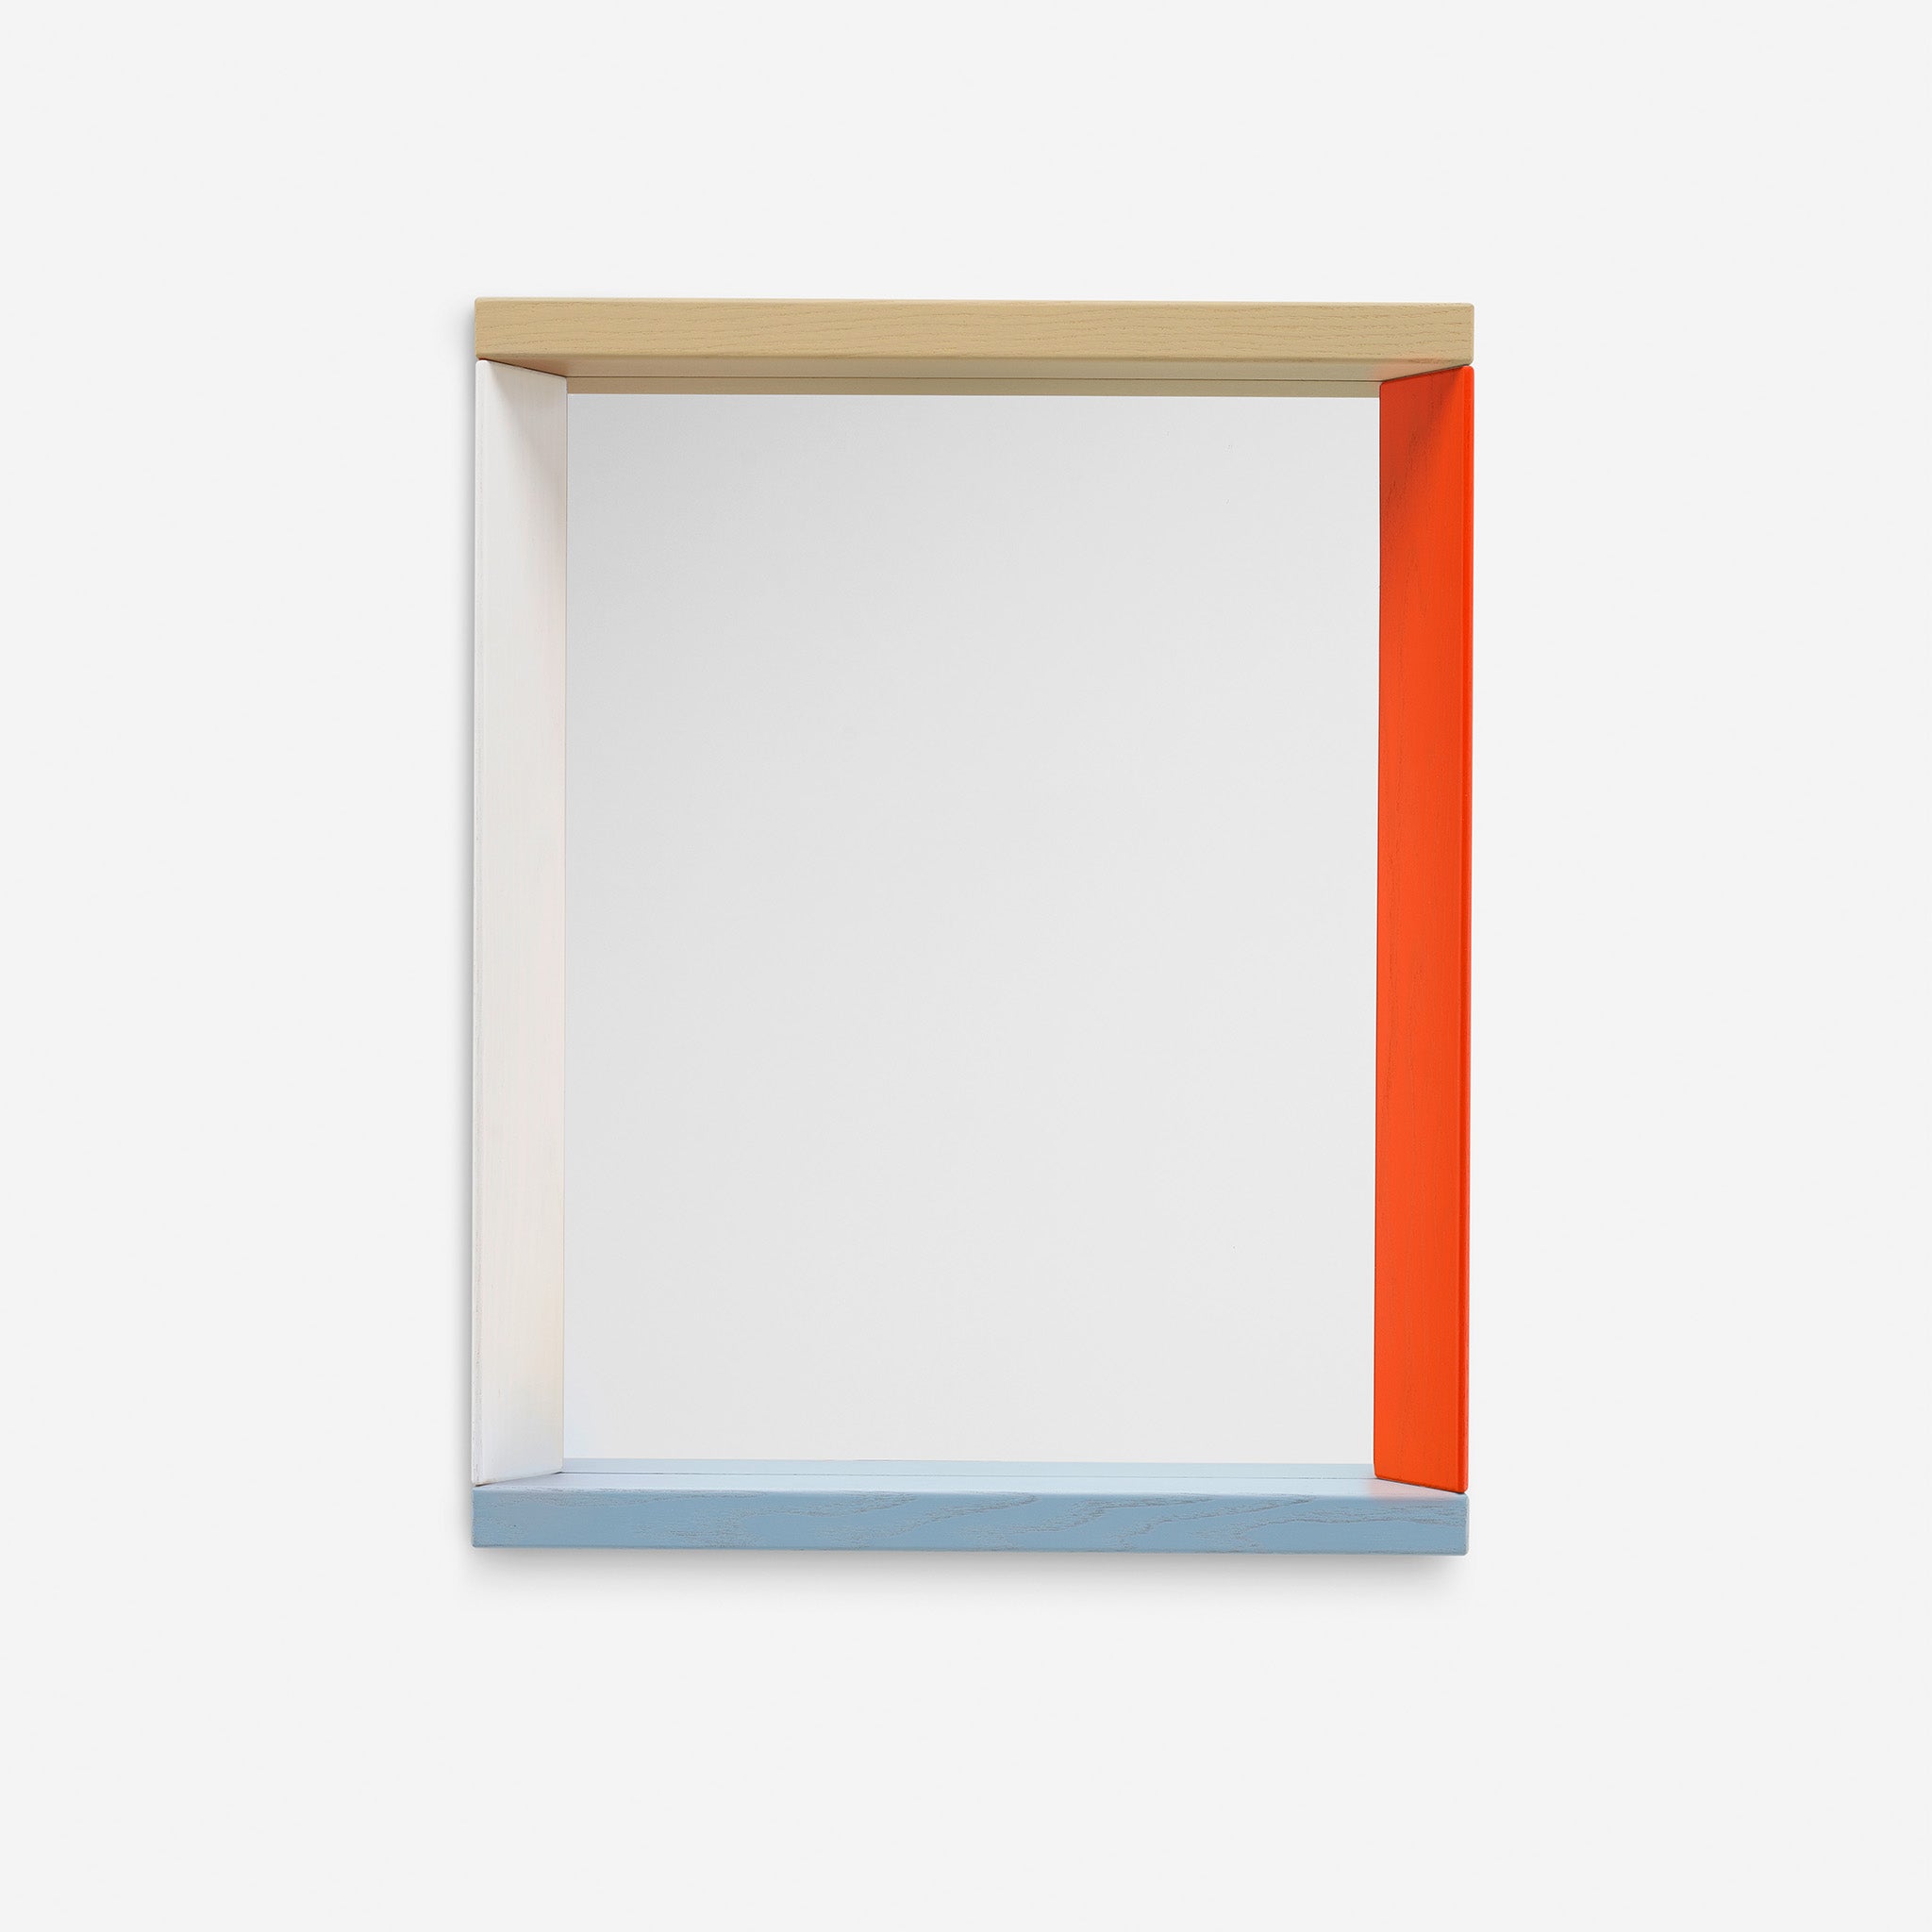 Colour Frame Mirrors by Julie Richoz for Vitra